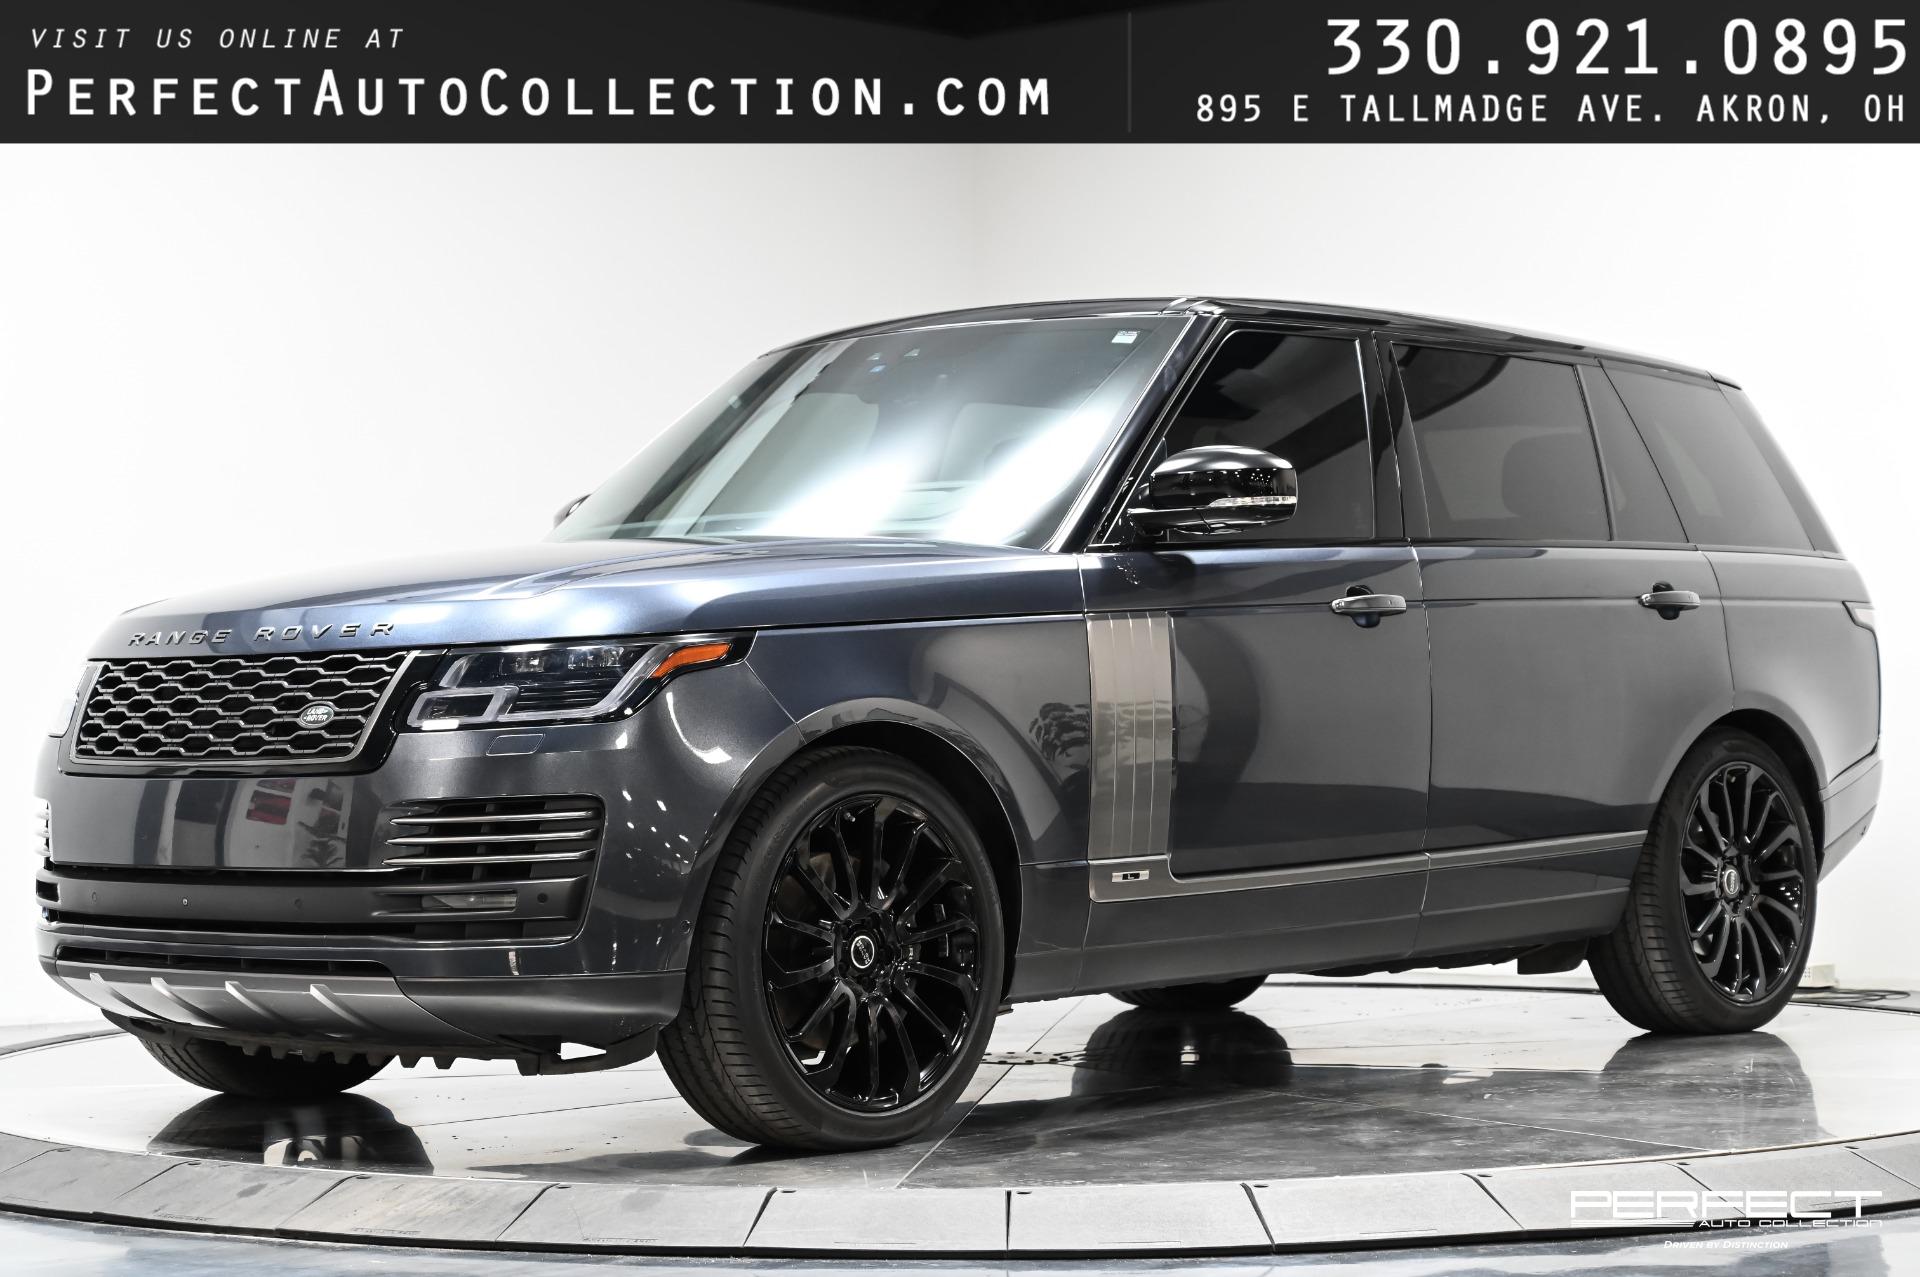 Used 2019 Land Rover Range Rover 5.0L V8 Supercharged Autobiography For Sale | Perfect Auto Stock #KA536588